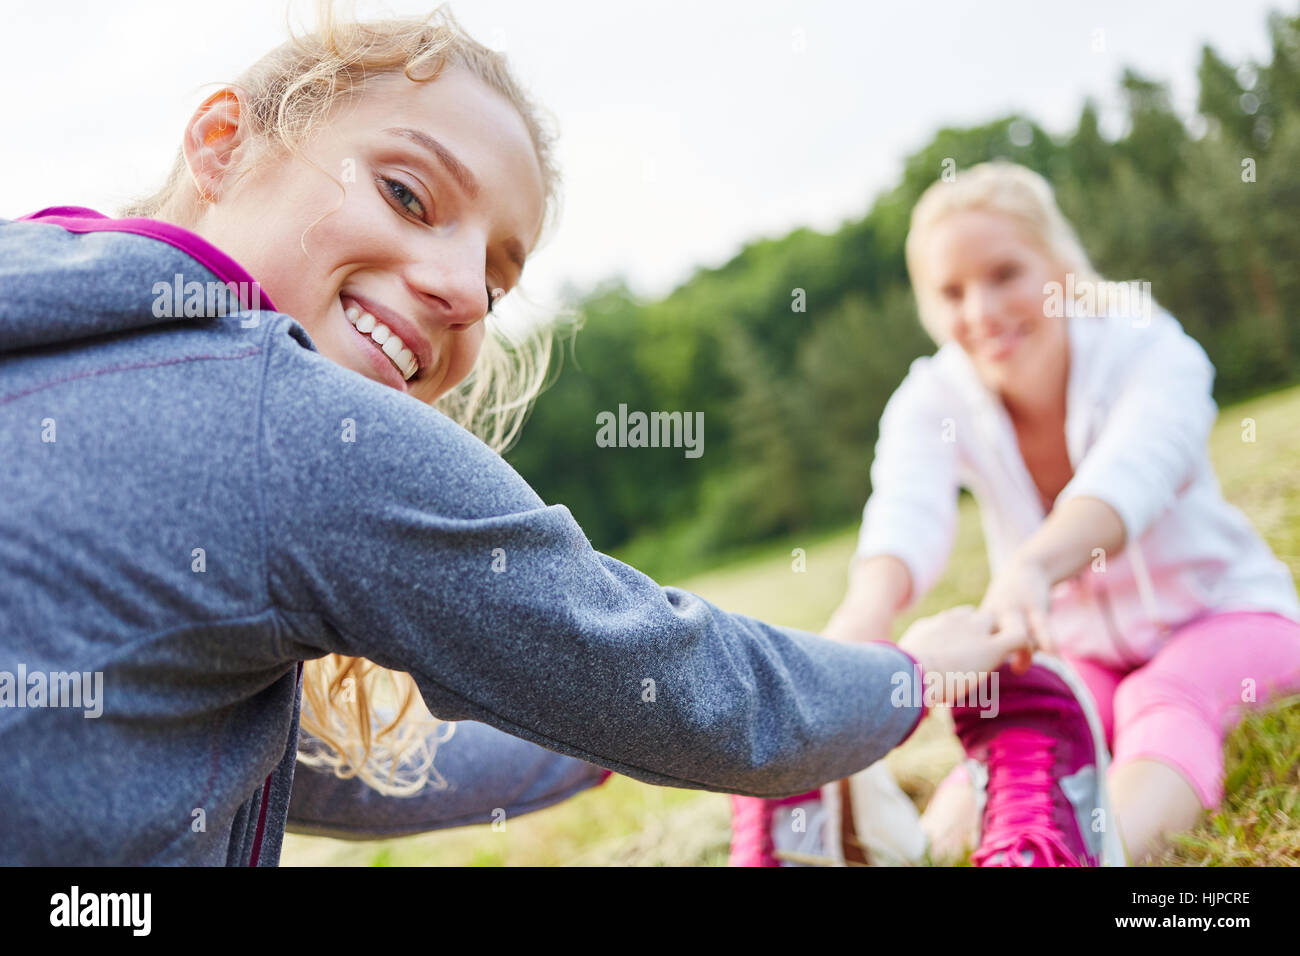 Woman warming up together before fitness class Stock Photo